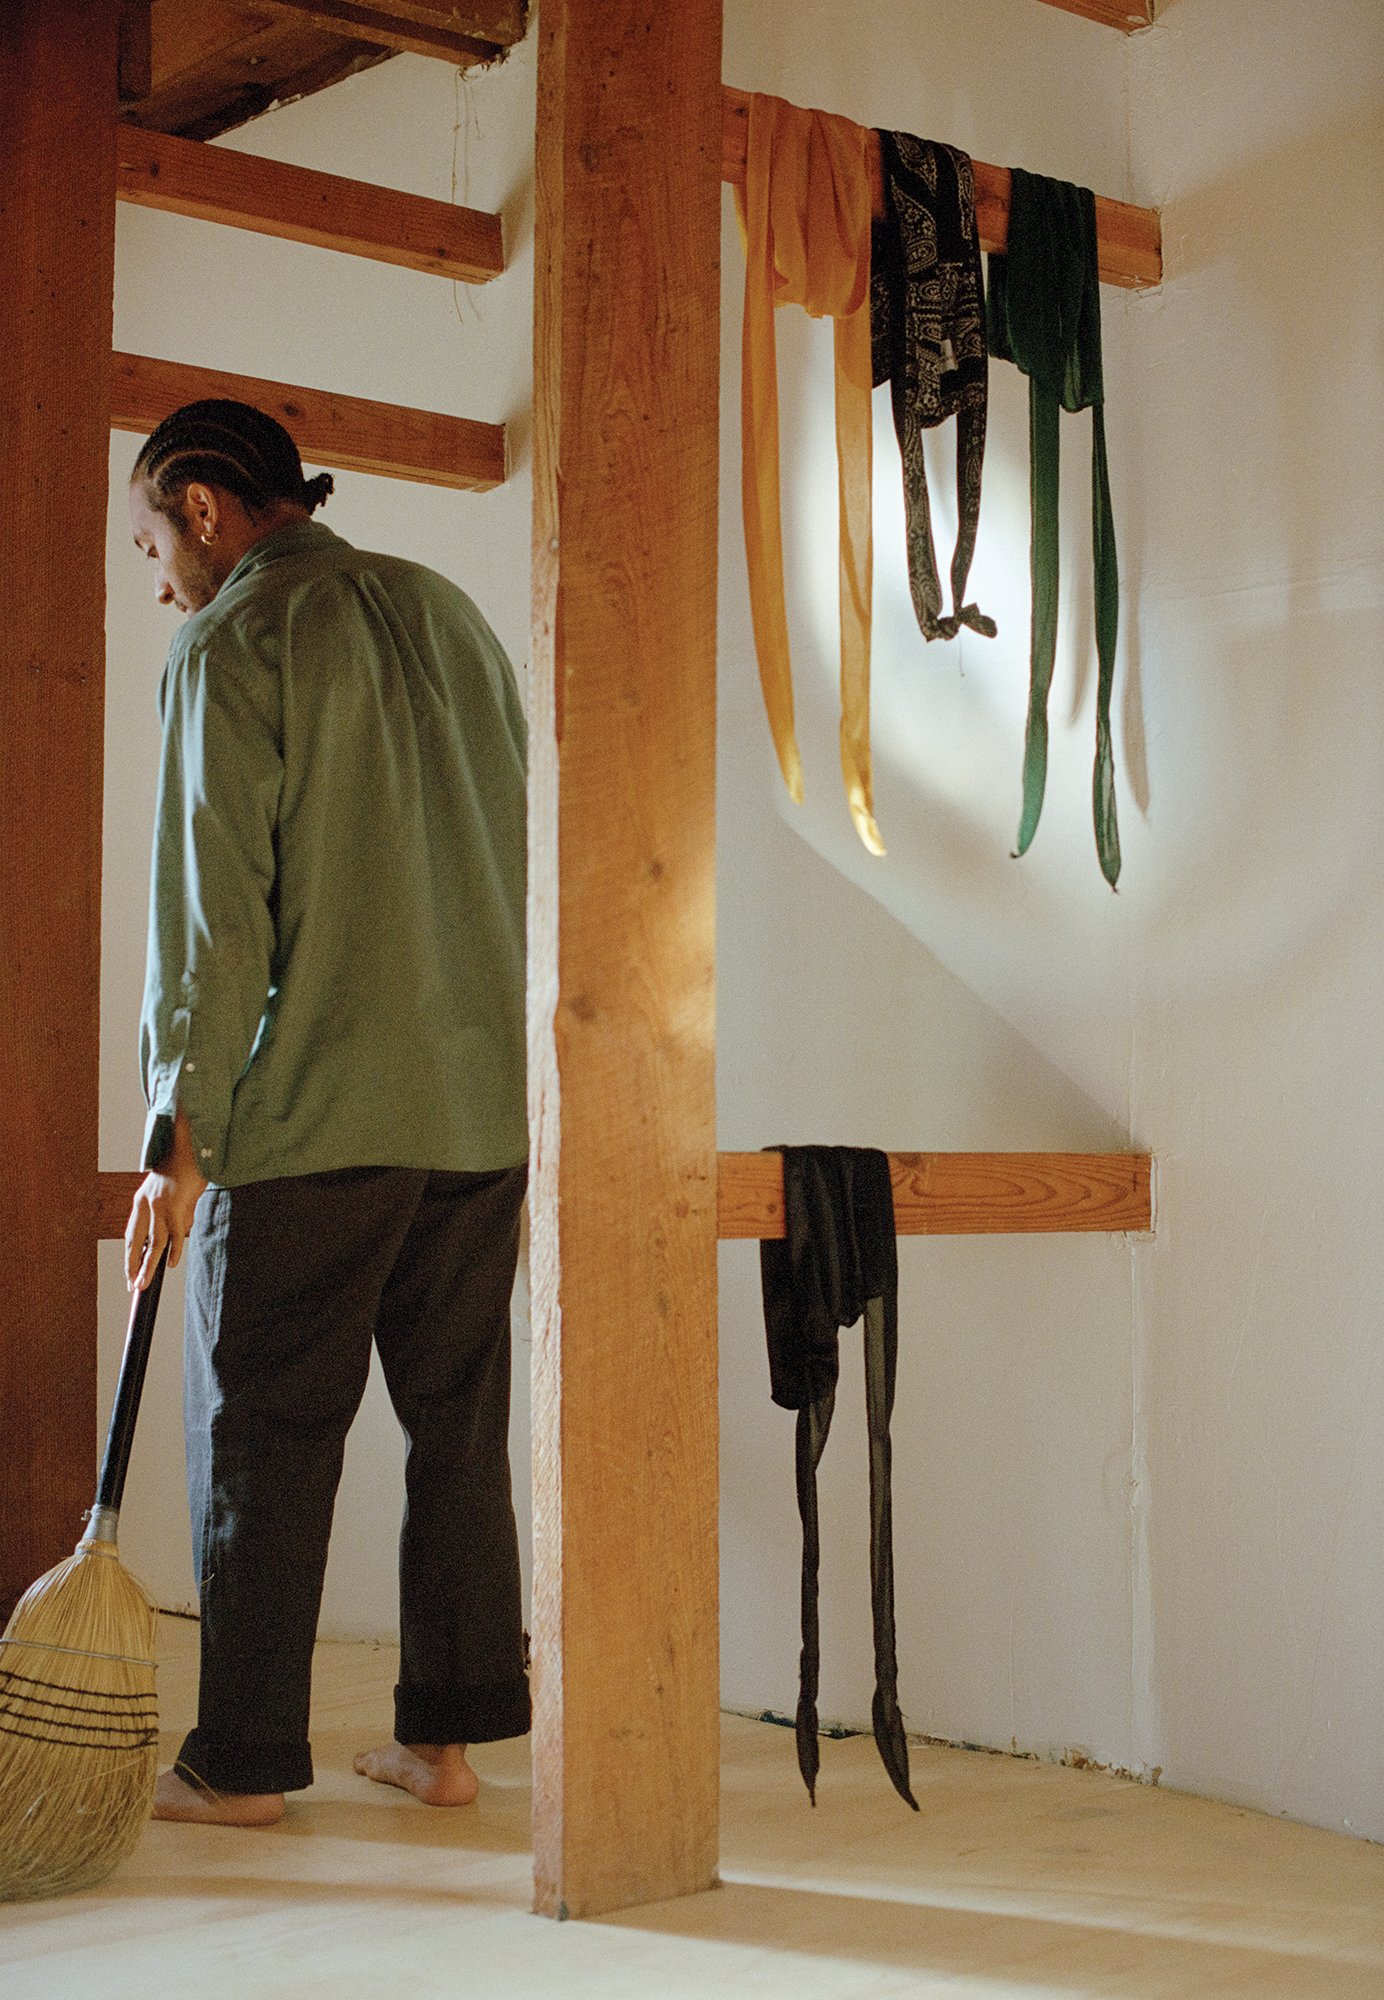 A photograph of a man wearing an army green shirt and dark pants sweeping with his back facing the viewer in a room where several items of clothing hang like ribbons from wooden beams.